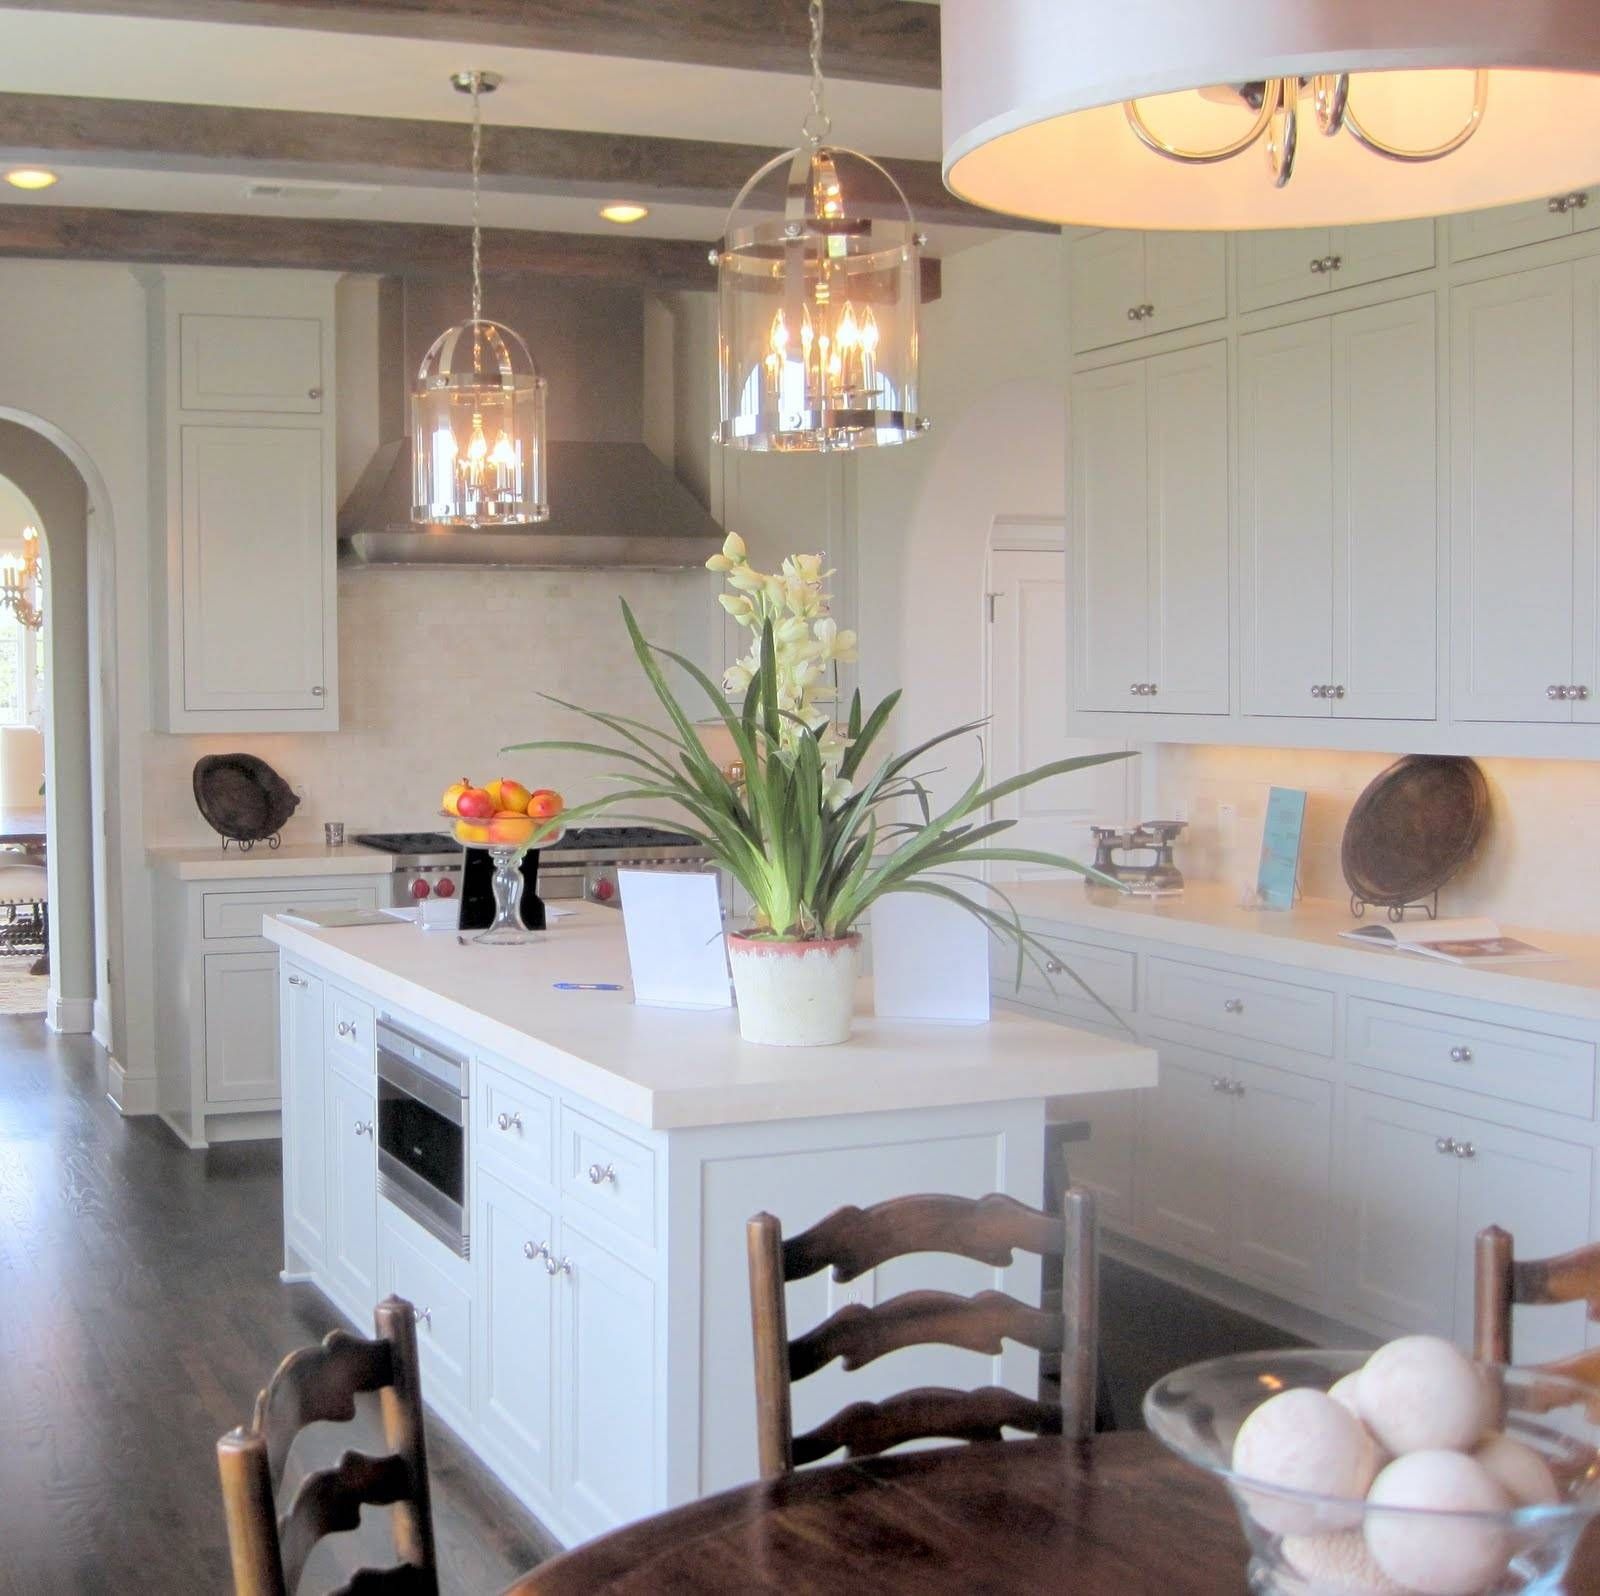 Island Pendant Lights Hanging For Kitchen Islands Ceiling Light Pertaining To Pendant Lights For Island (View 7 of 15)